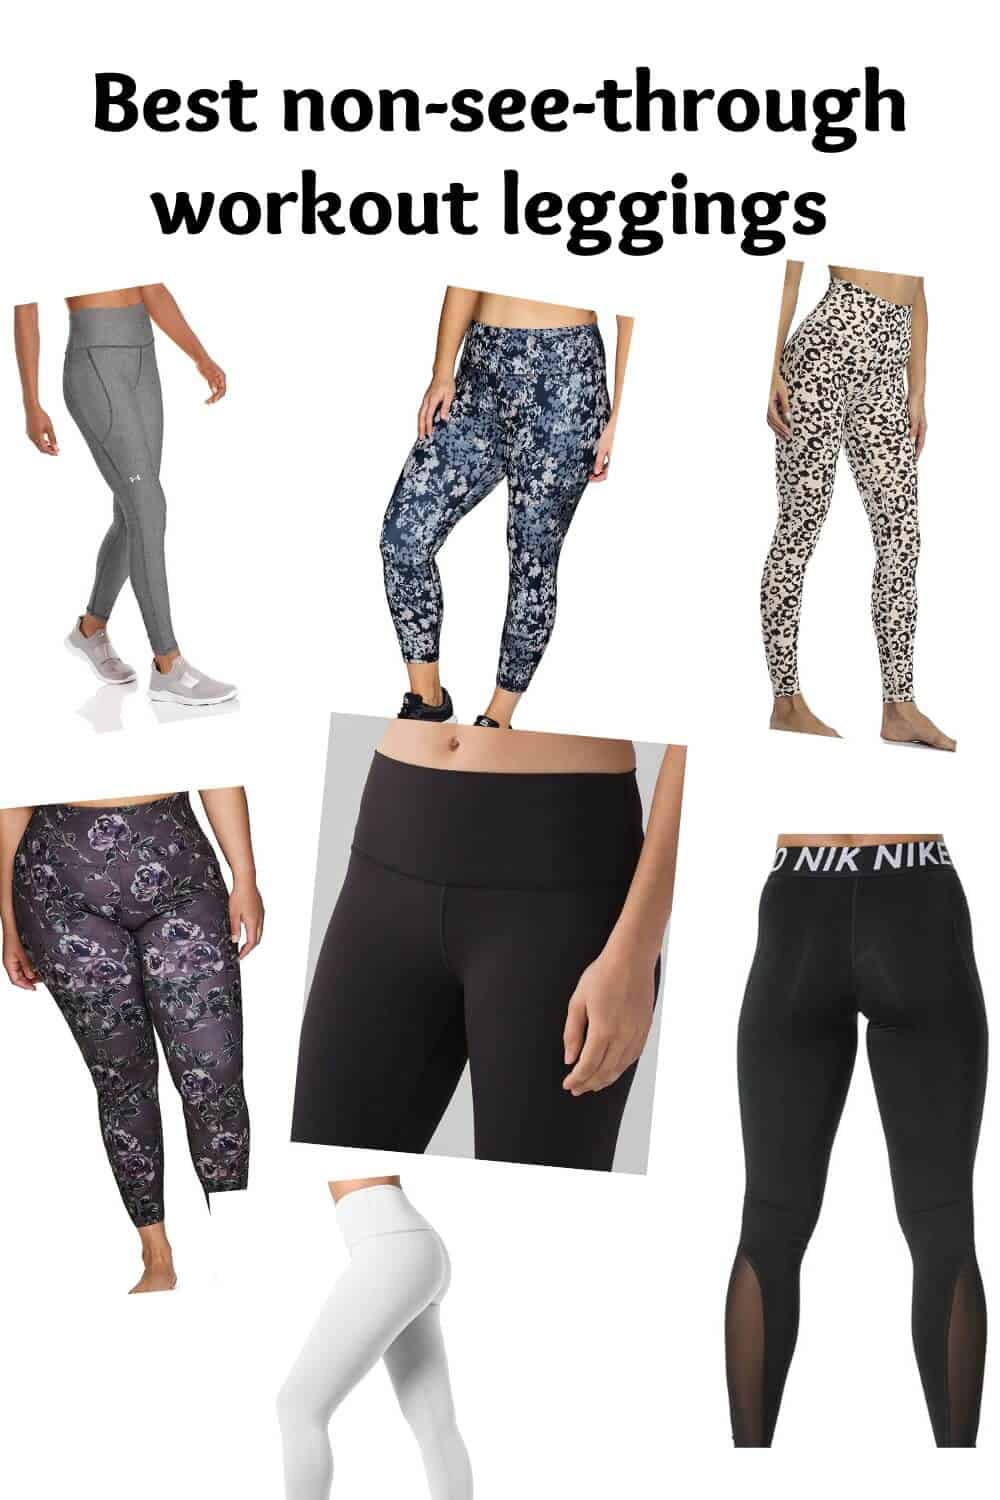 7 leggings that arent seethrough and wont show underwear lines